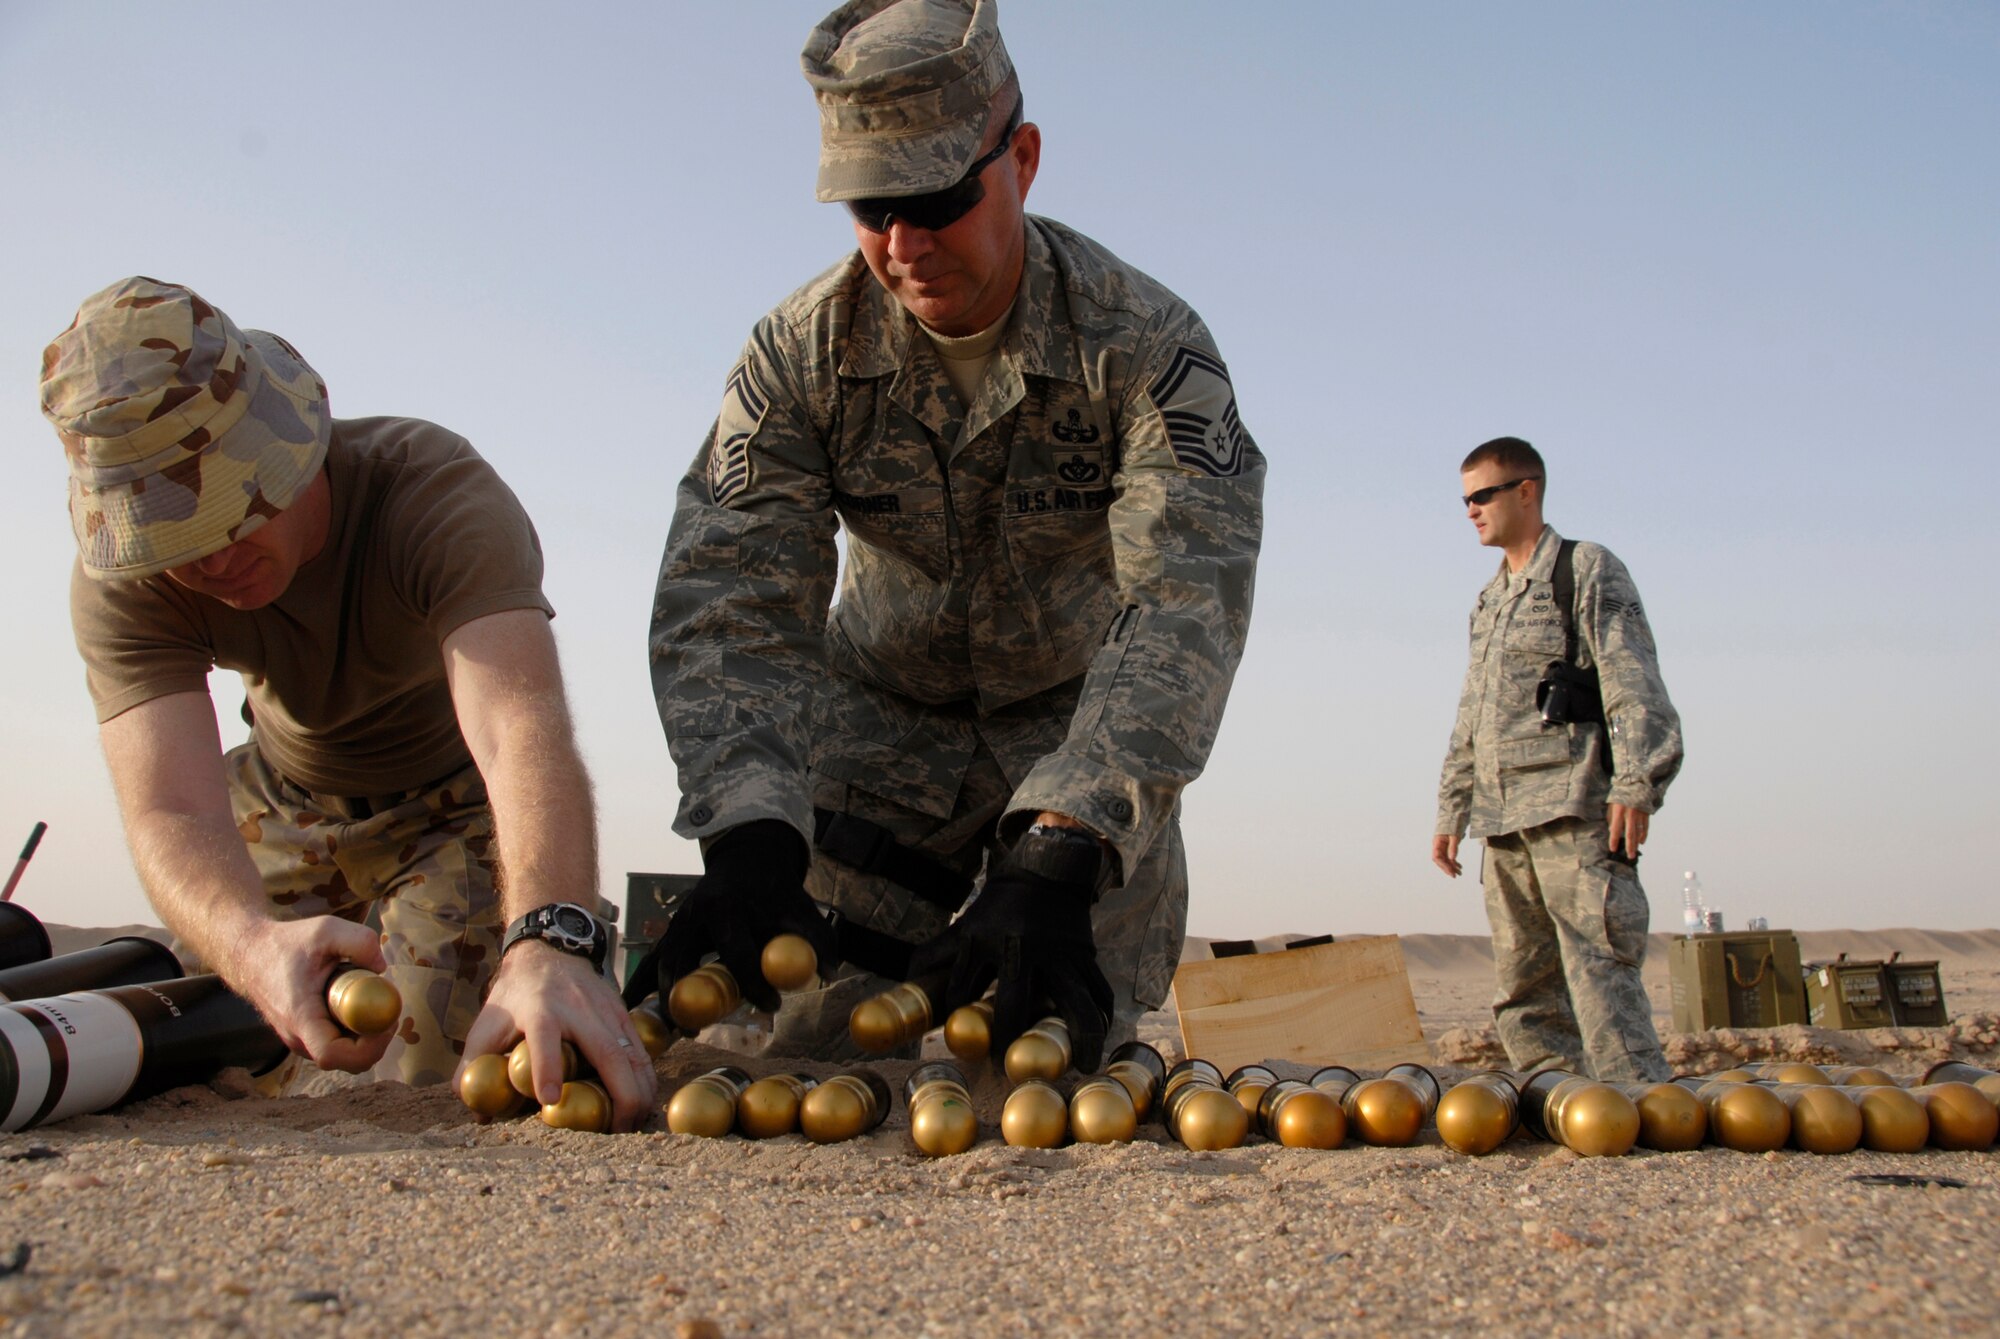 SOUTHWEST ASIA -- Australian Army ammunition technician Warrant Officer Class Two Neil Snape (left), Senior Master Sgt. Russell Corner (center), and Senior Airman Charles Howell, both from the 386th Expeditionary Civil Engineer Squadron explosive ordnance disposal flight, help move 40 millimeter high explosive dual purpose rifle grenades for disposal during a controlled detonation June 20, 2008, at an EOD range in the Persian Gulf Region.  The joint detonation also provided an opportunity for the coalition forces to enhance relations while learning some of the slight differences in operating procedures. (U.S. Air Force photo/ Staff Sgt. Patrick Dixon)